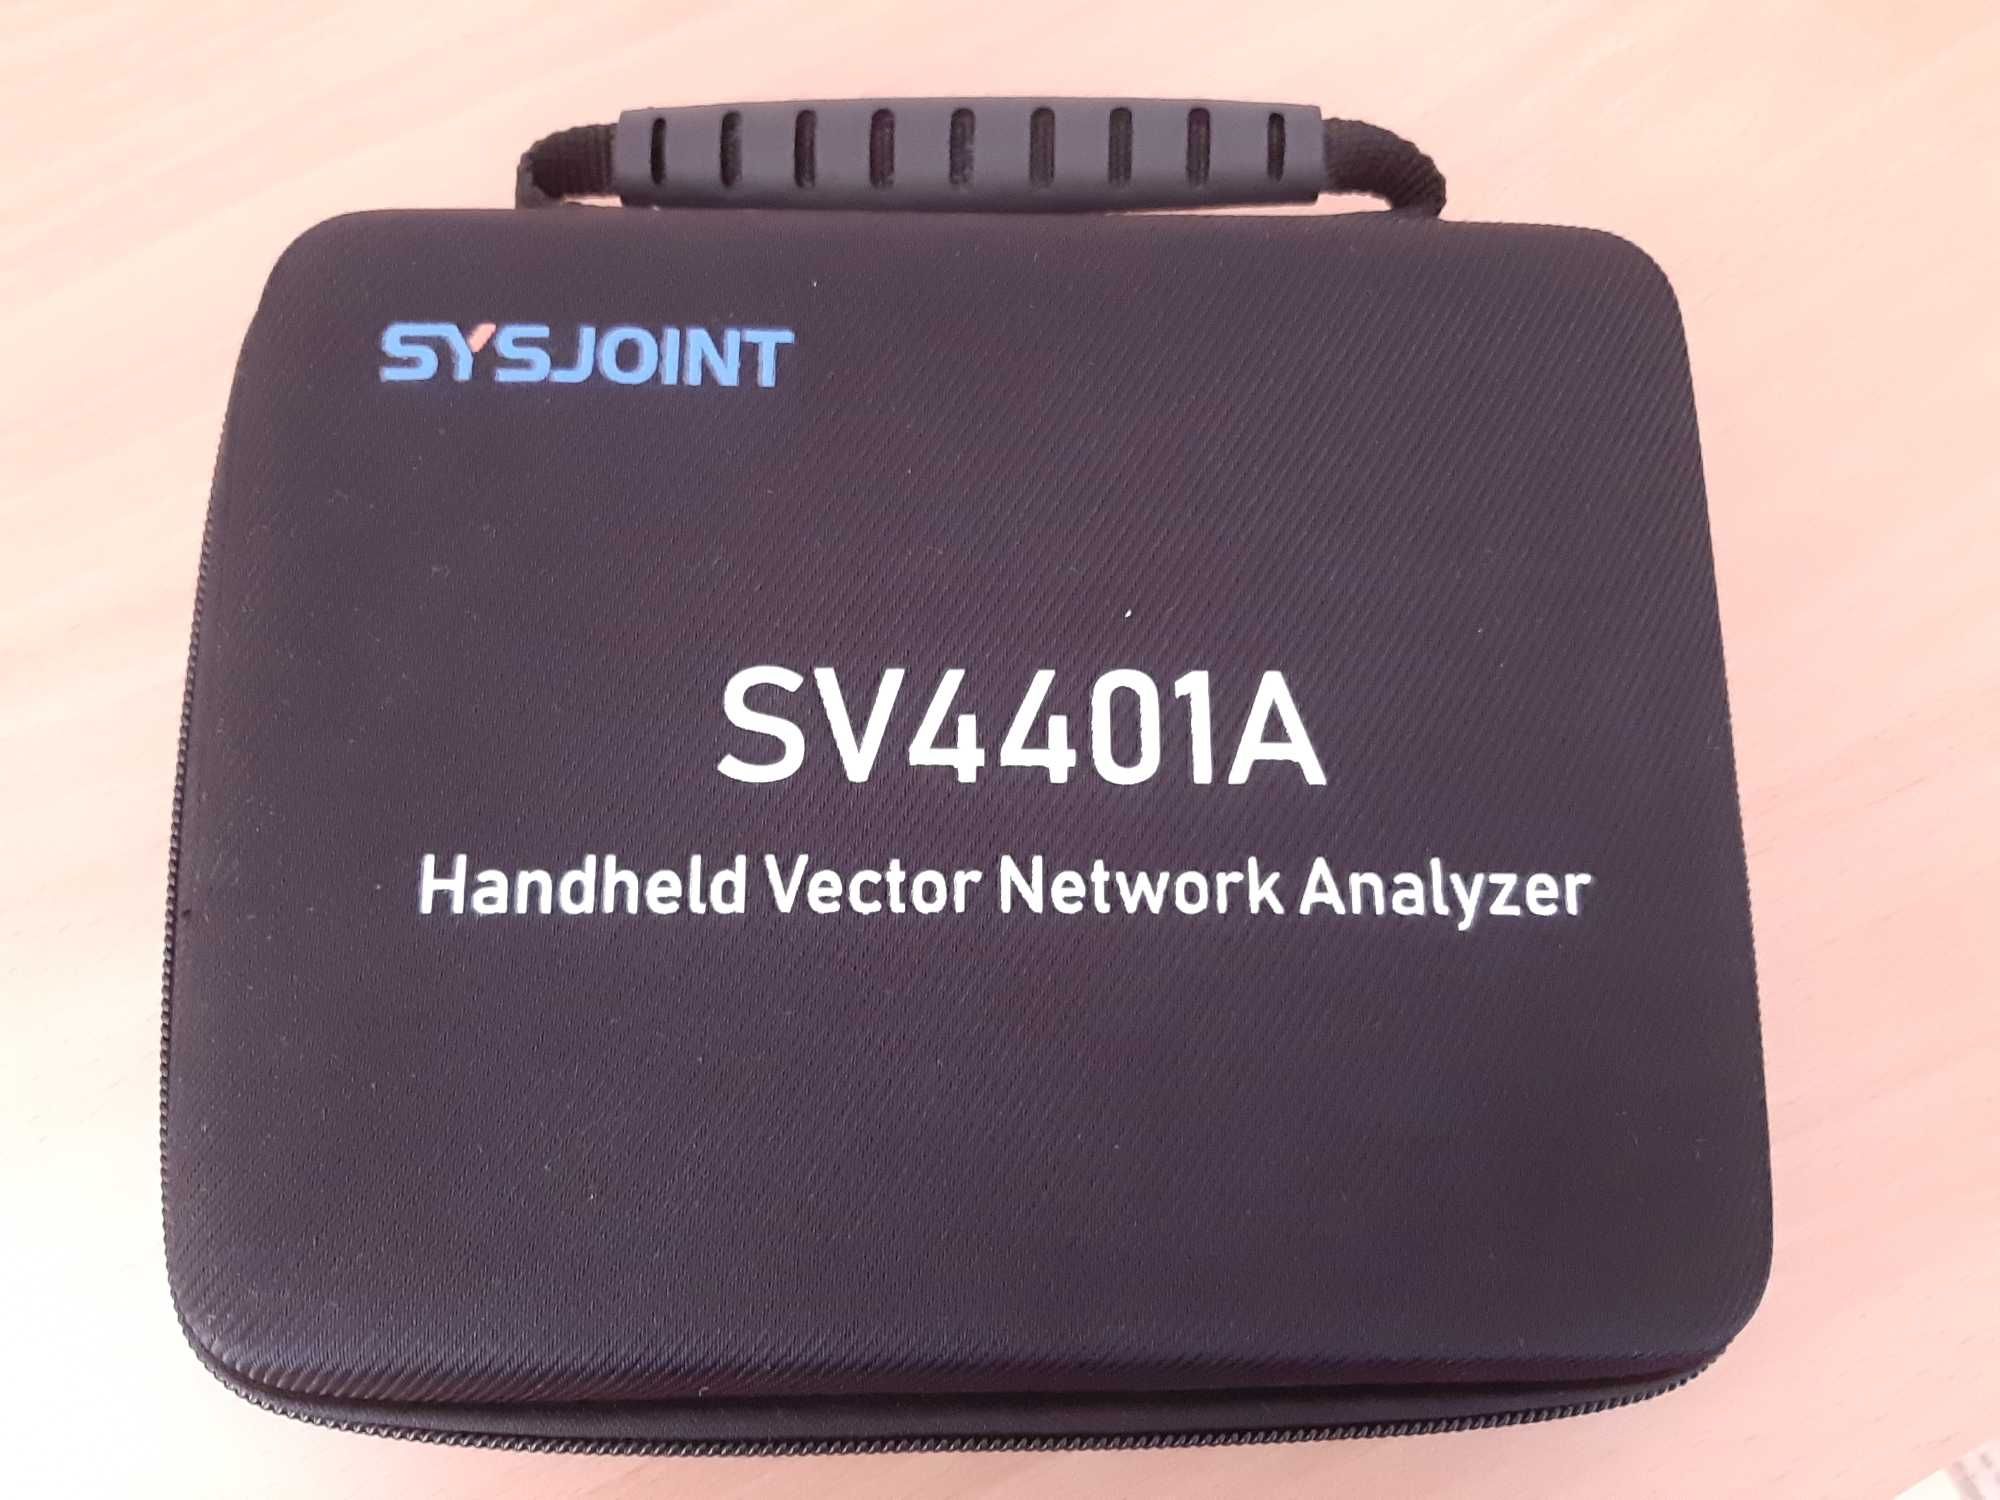 SV4401A Vector Network Analyzer 50KHz-4.4GHz 7-inch large screen 100db